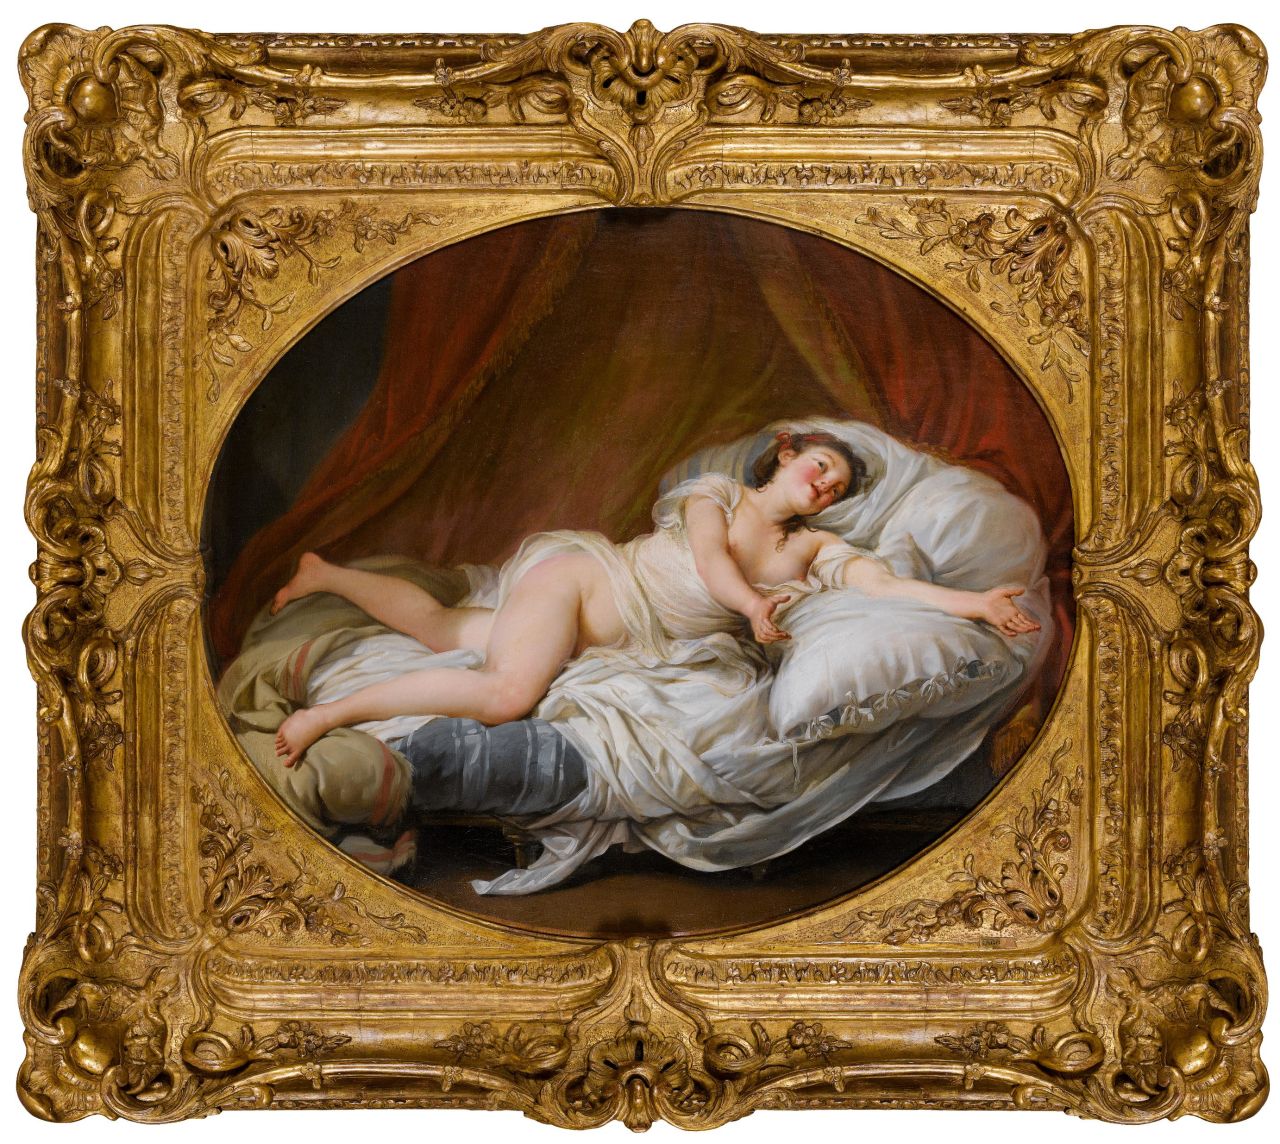 "Young Lady Laying on a Bed" (1771) by Hugues Taraval